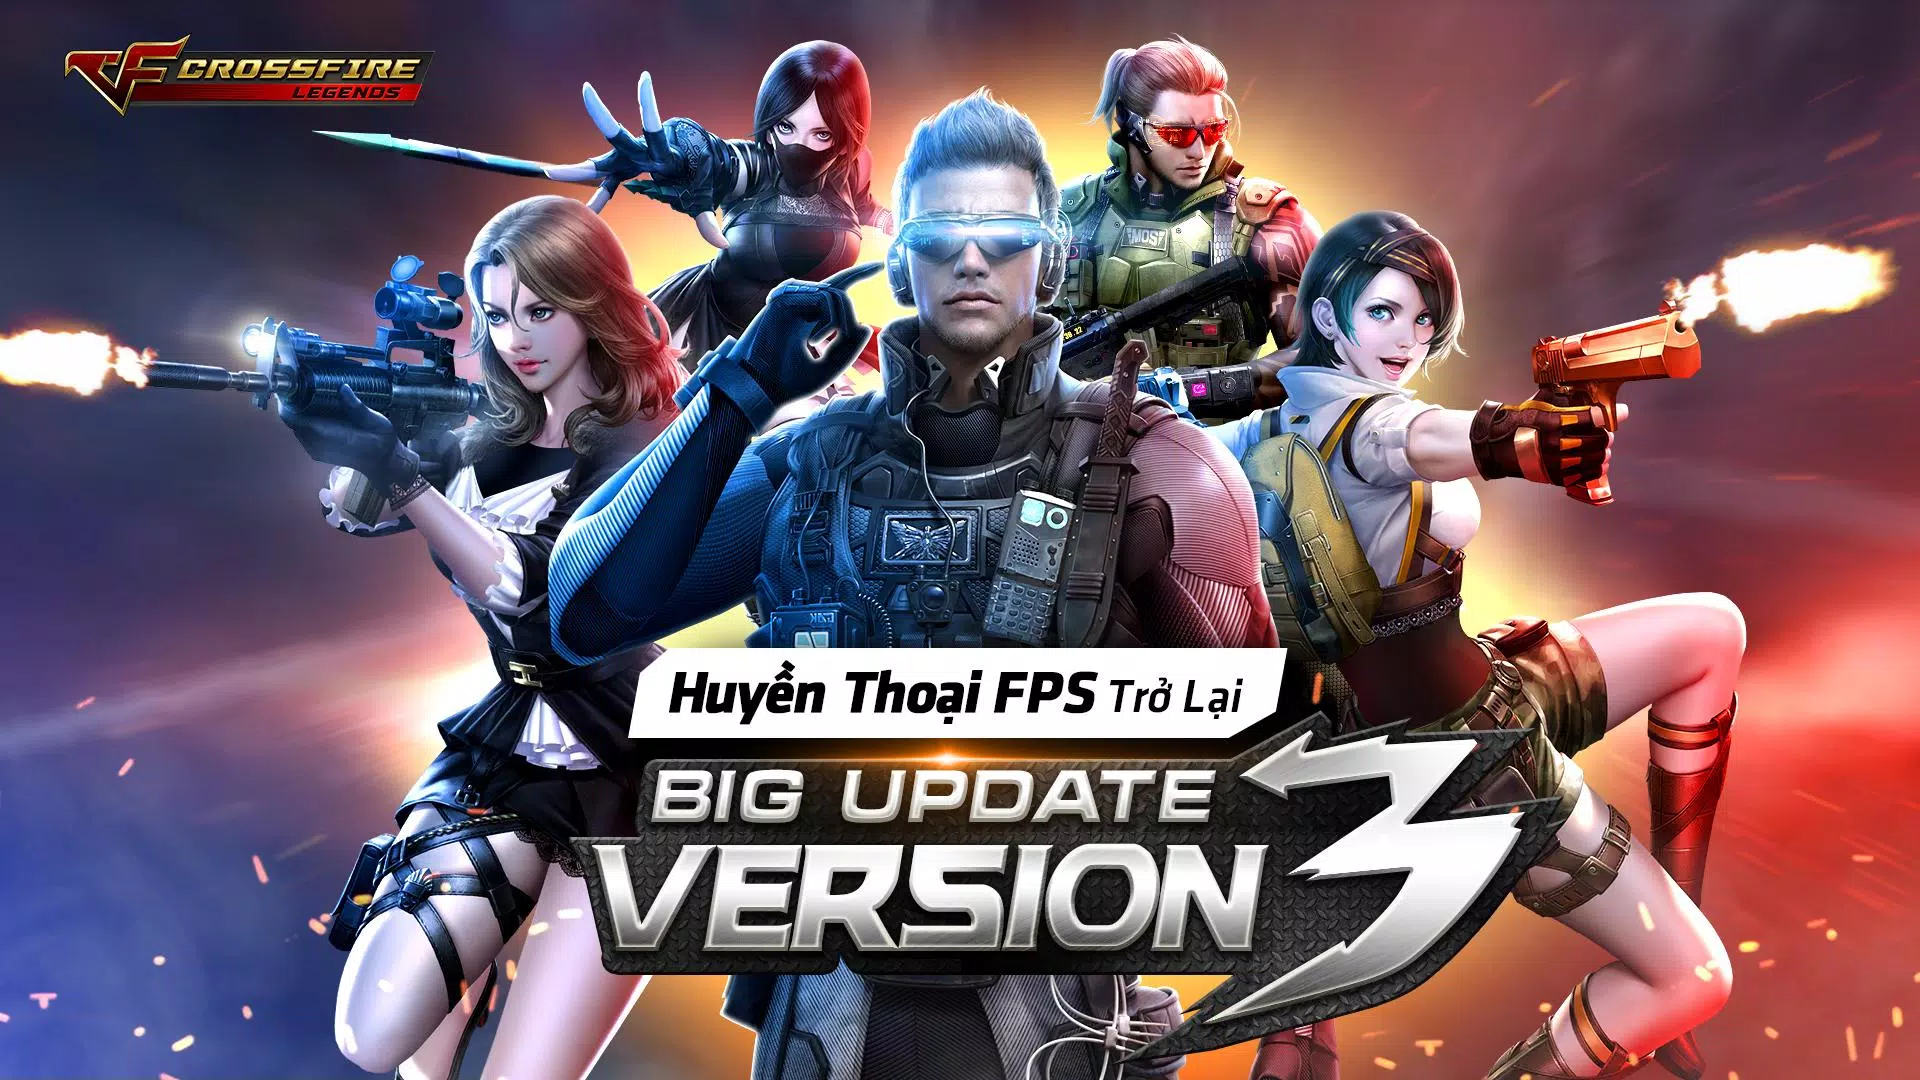 Crossfire: Legends Cho Android - Tải Về Apk